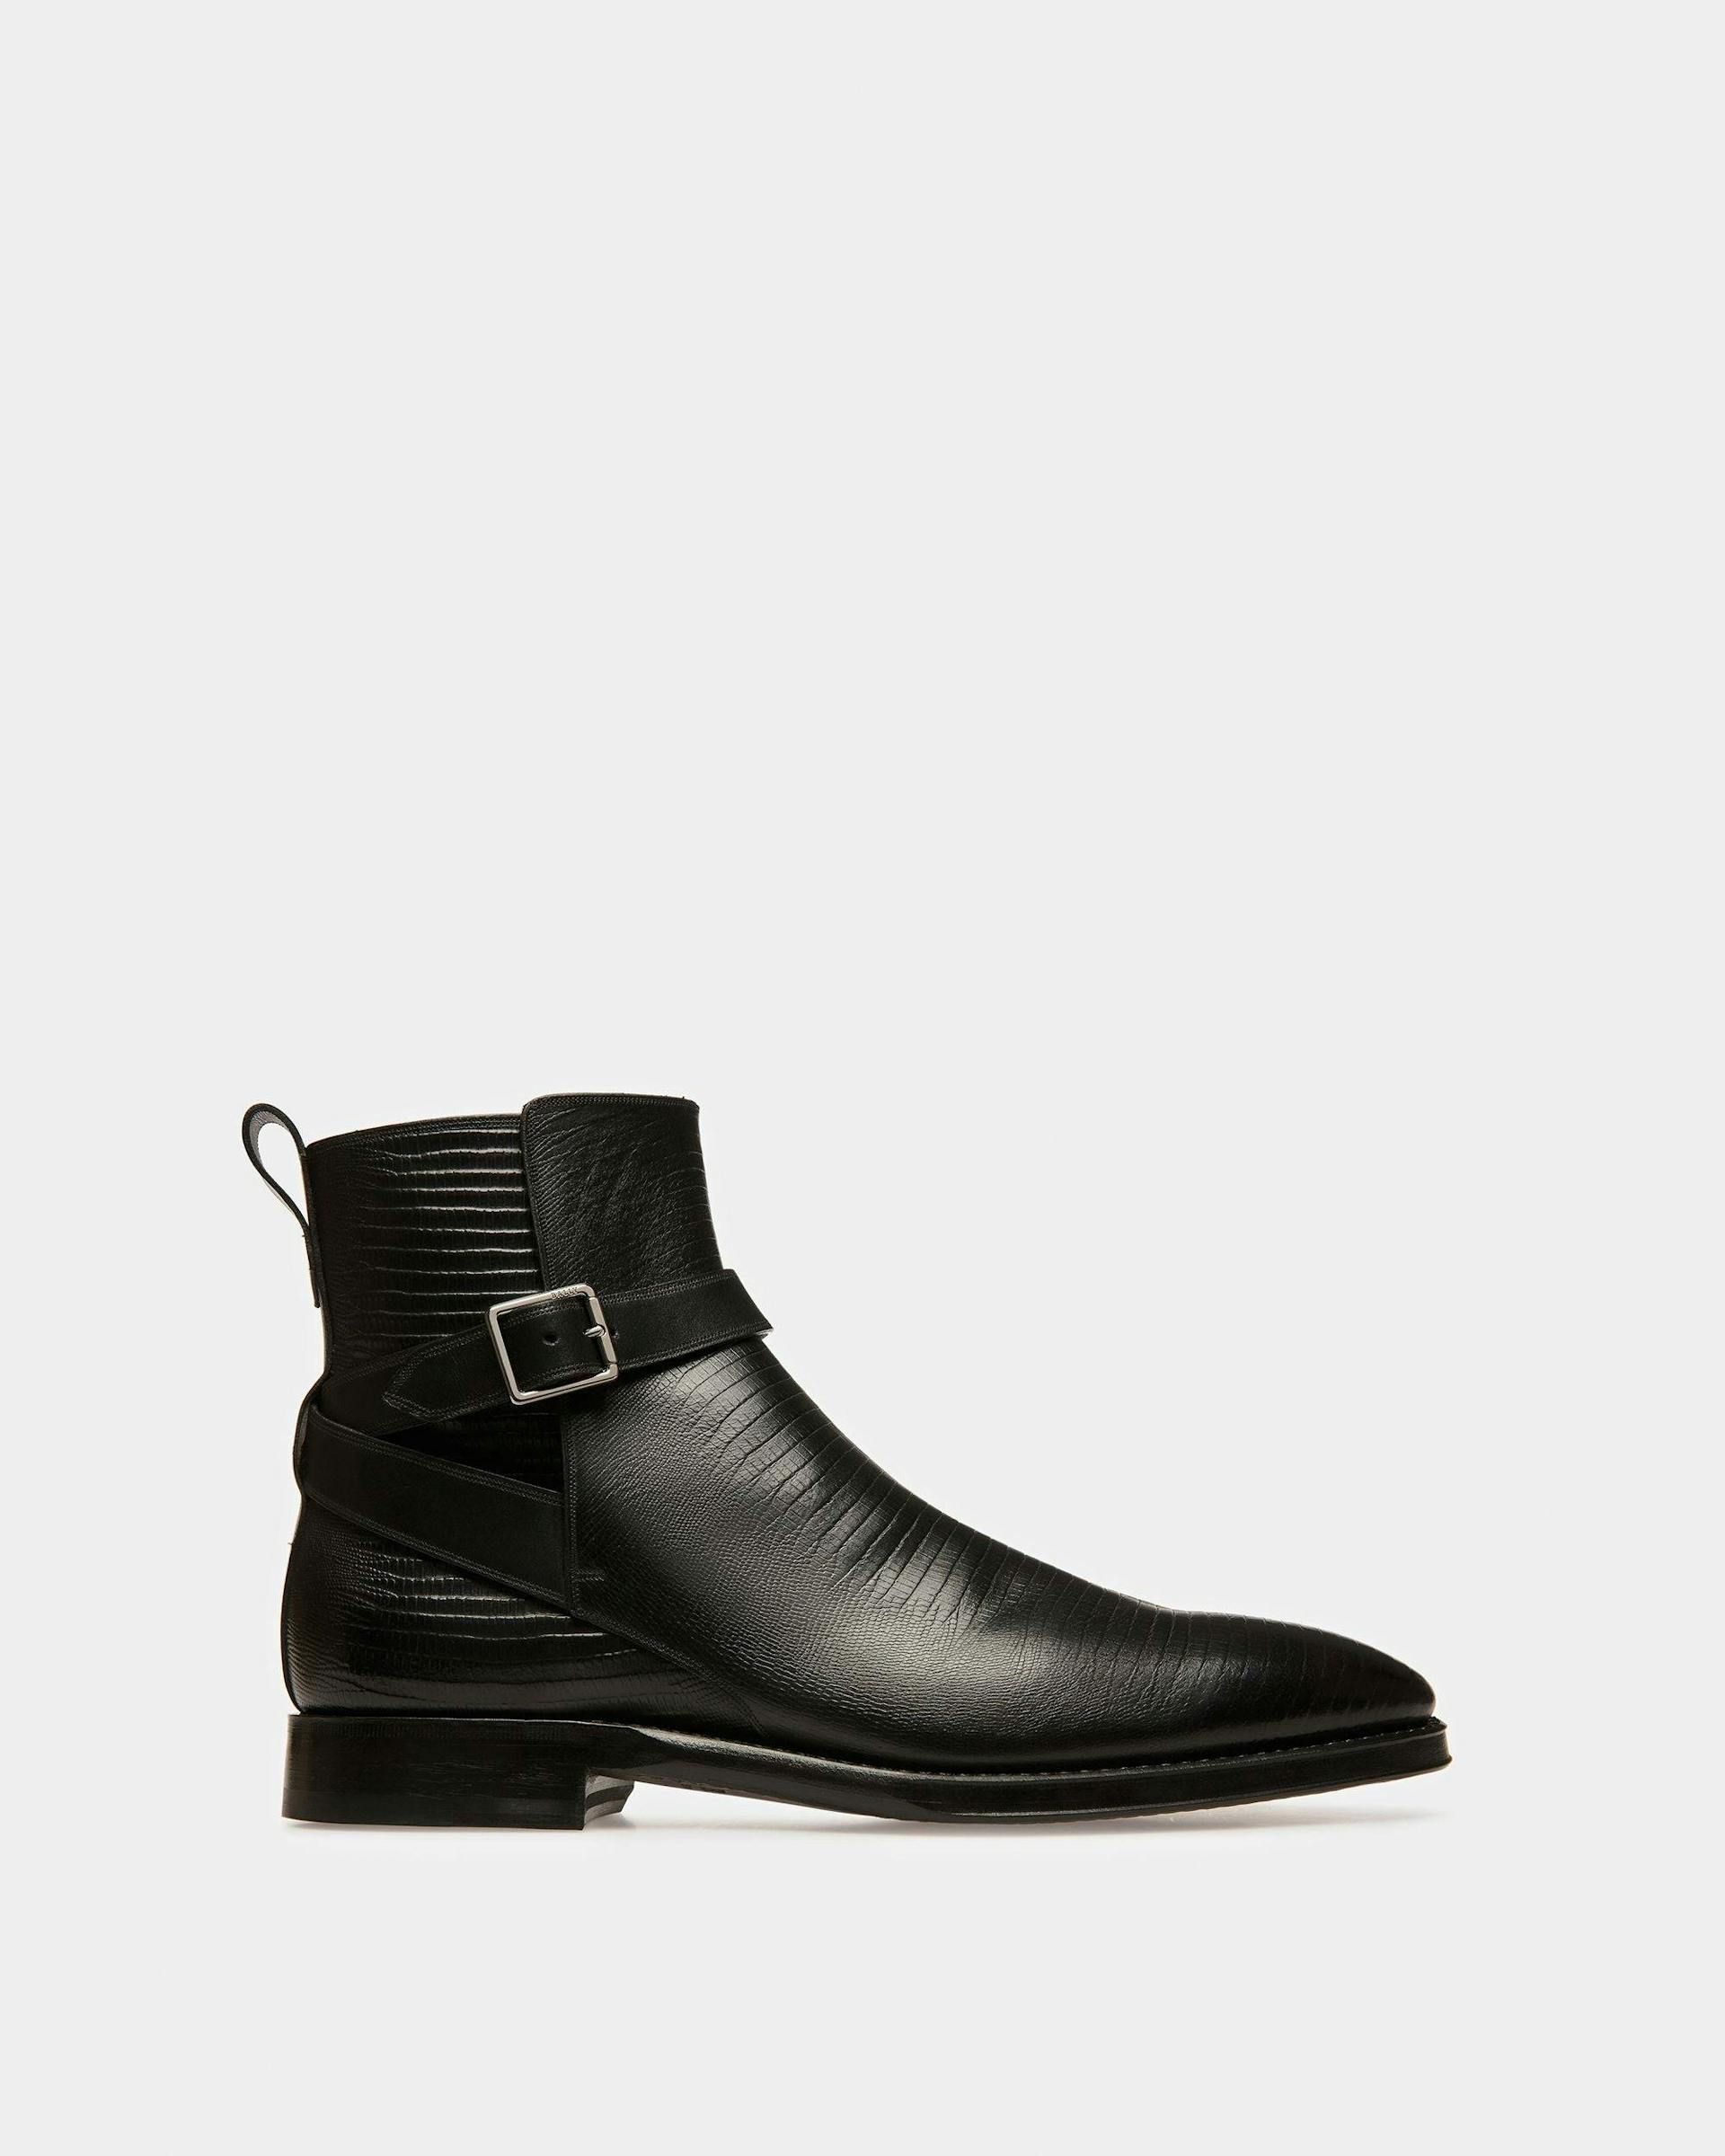 Scaviel Leather Boots In Black - Men's - Bally - 01